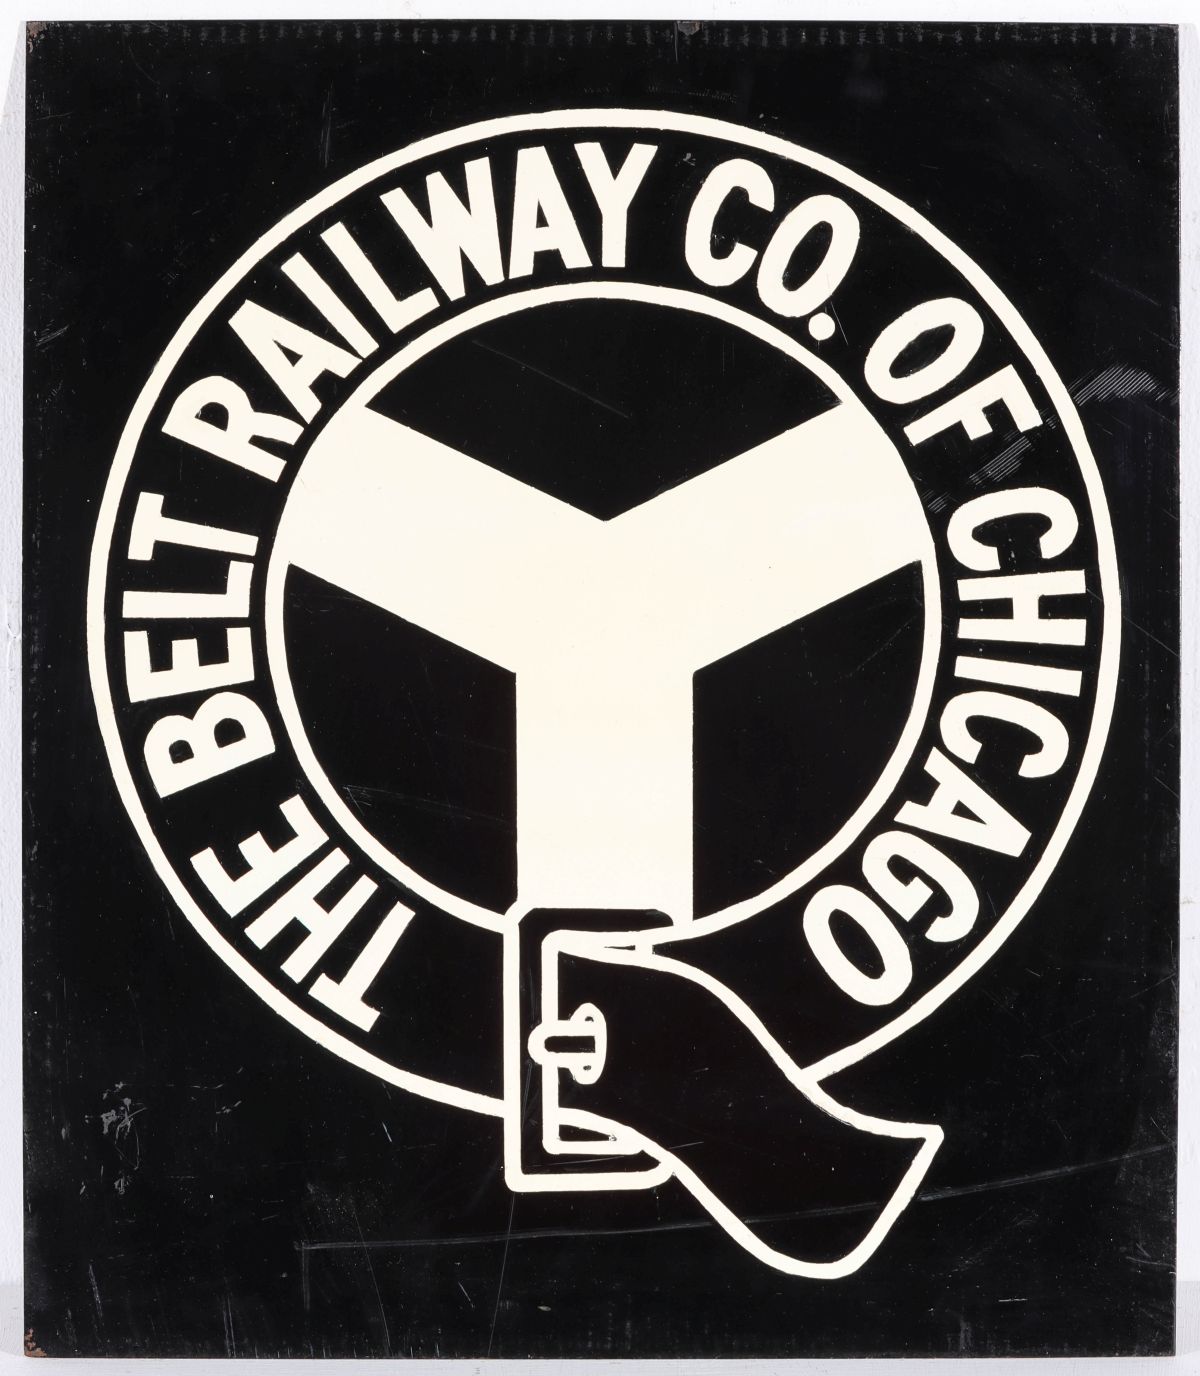 BELT RAILWAY OF CHICAGO PAINTED METAL SIGN